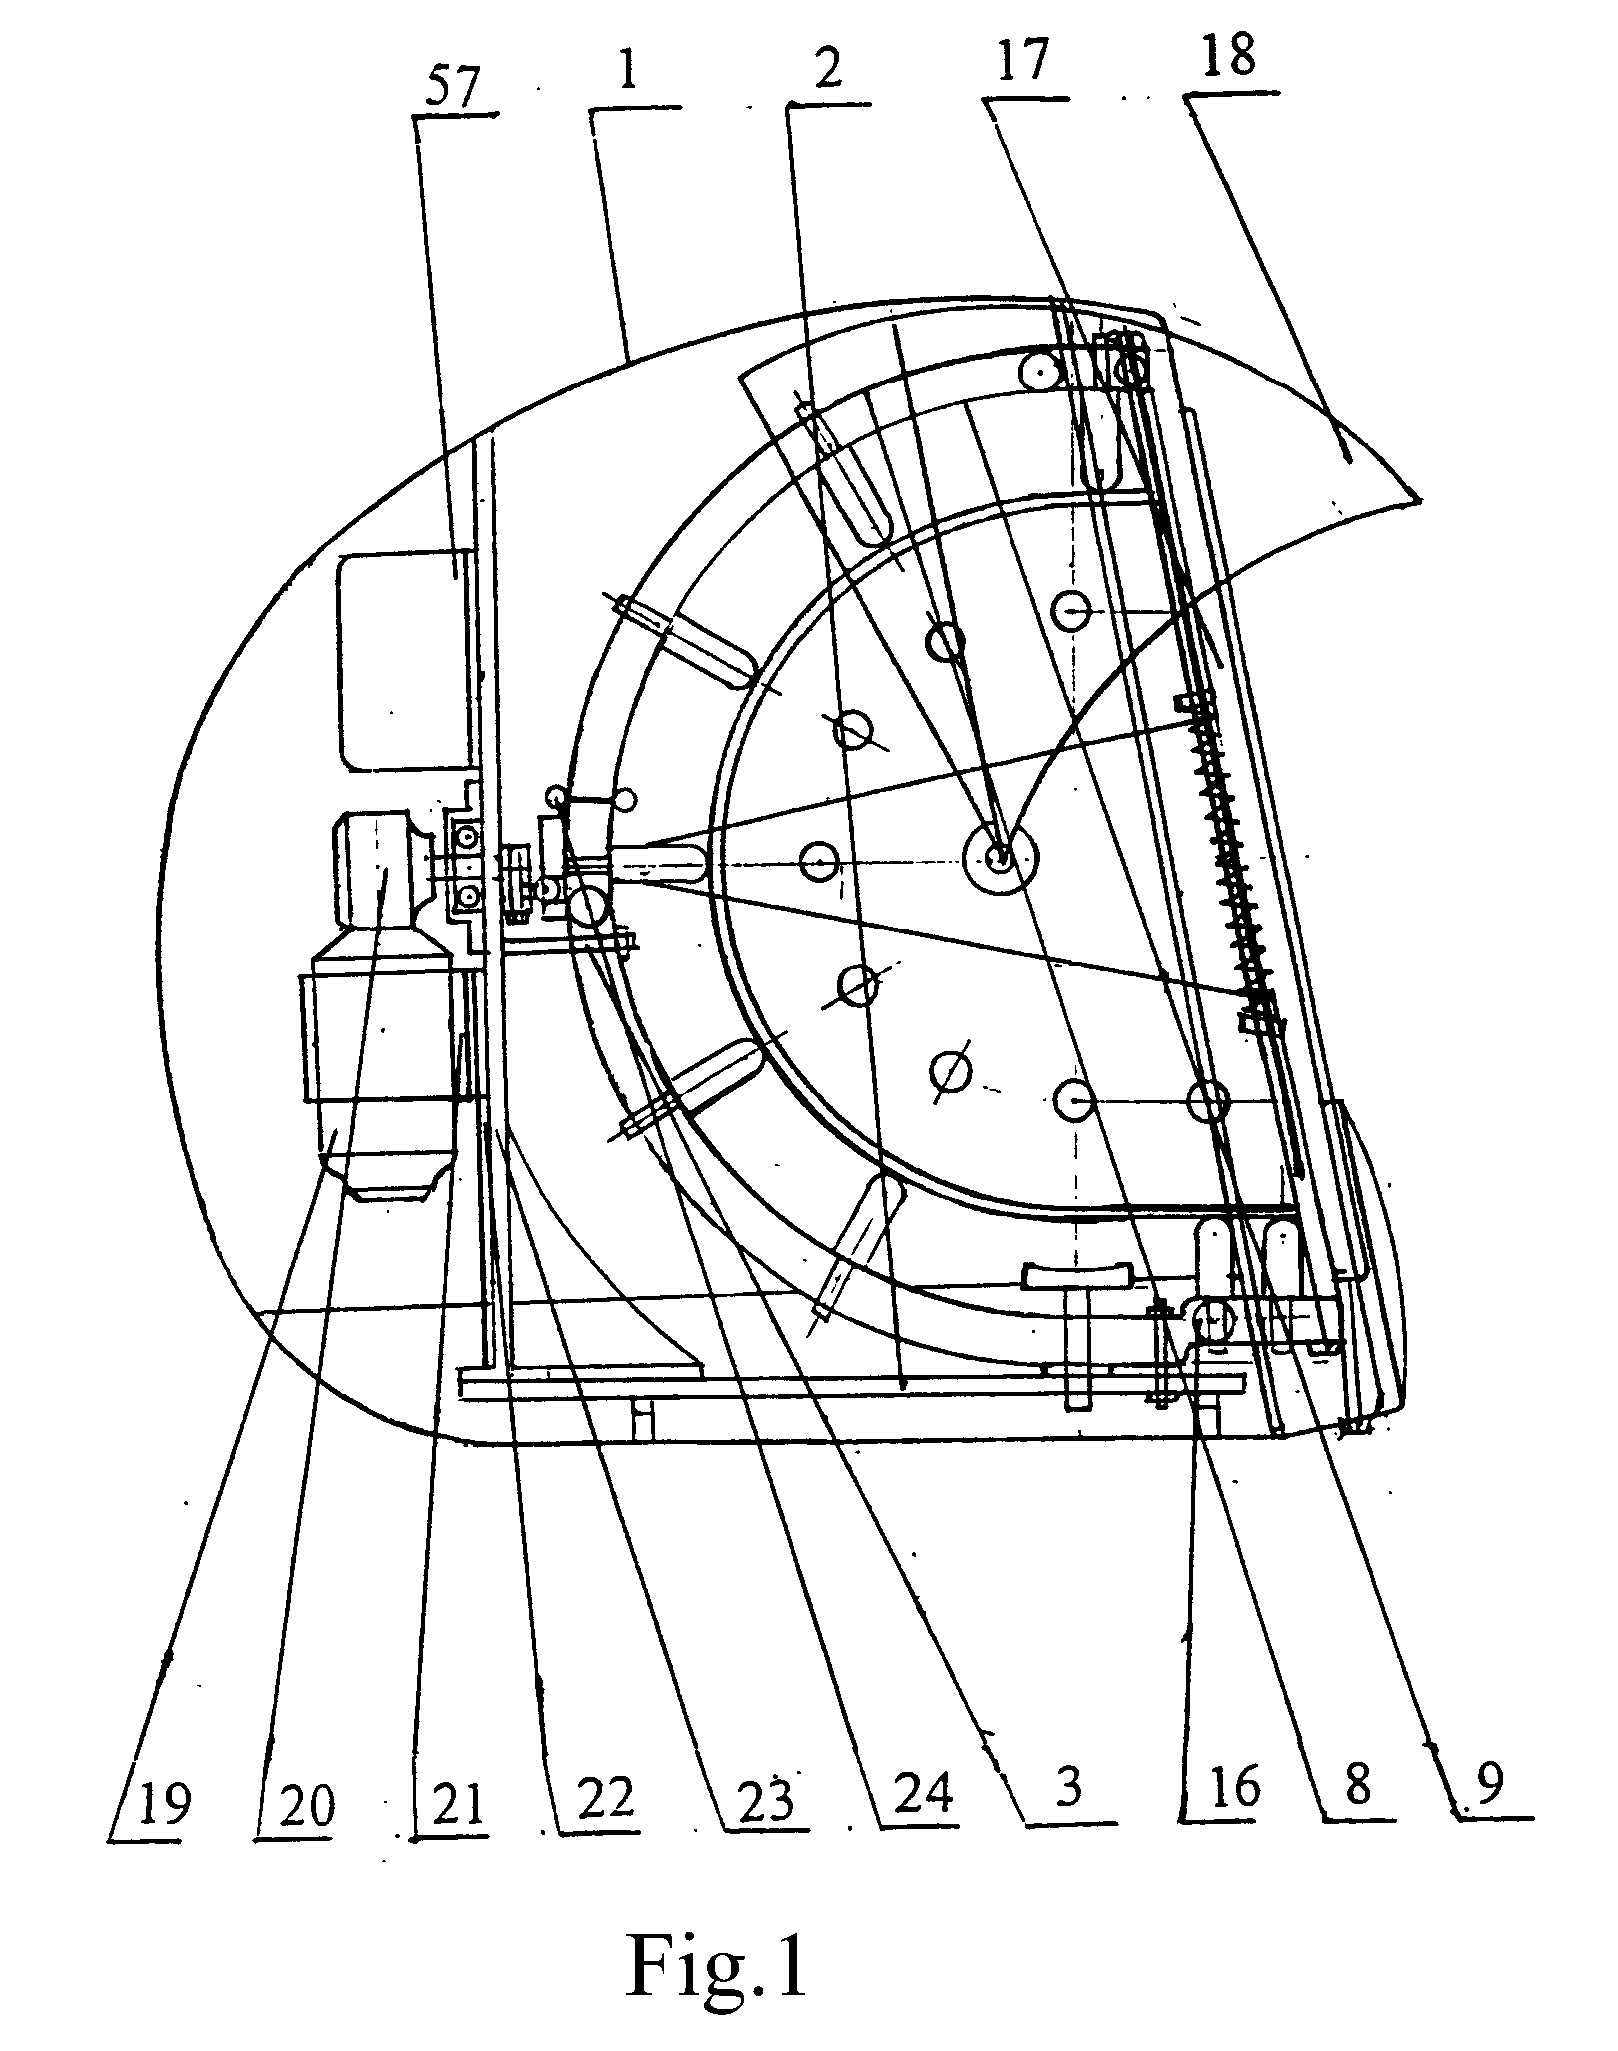 Medication head-massaging healthcare and therapy apparatus